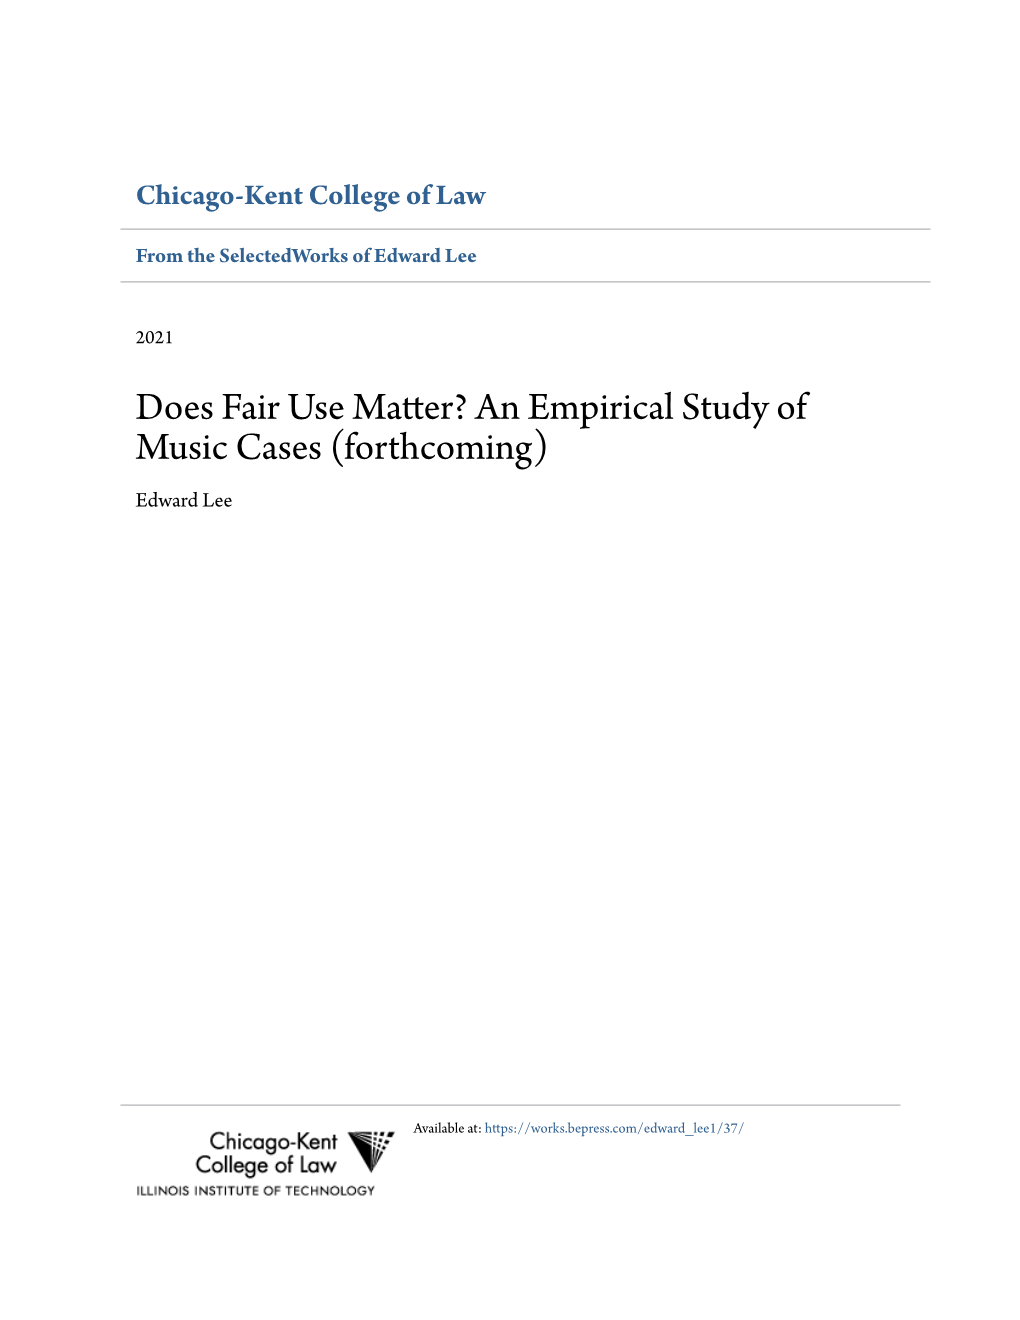 An Empirical Study of Music Cases (Forthcoming) Edward Lee